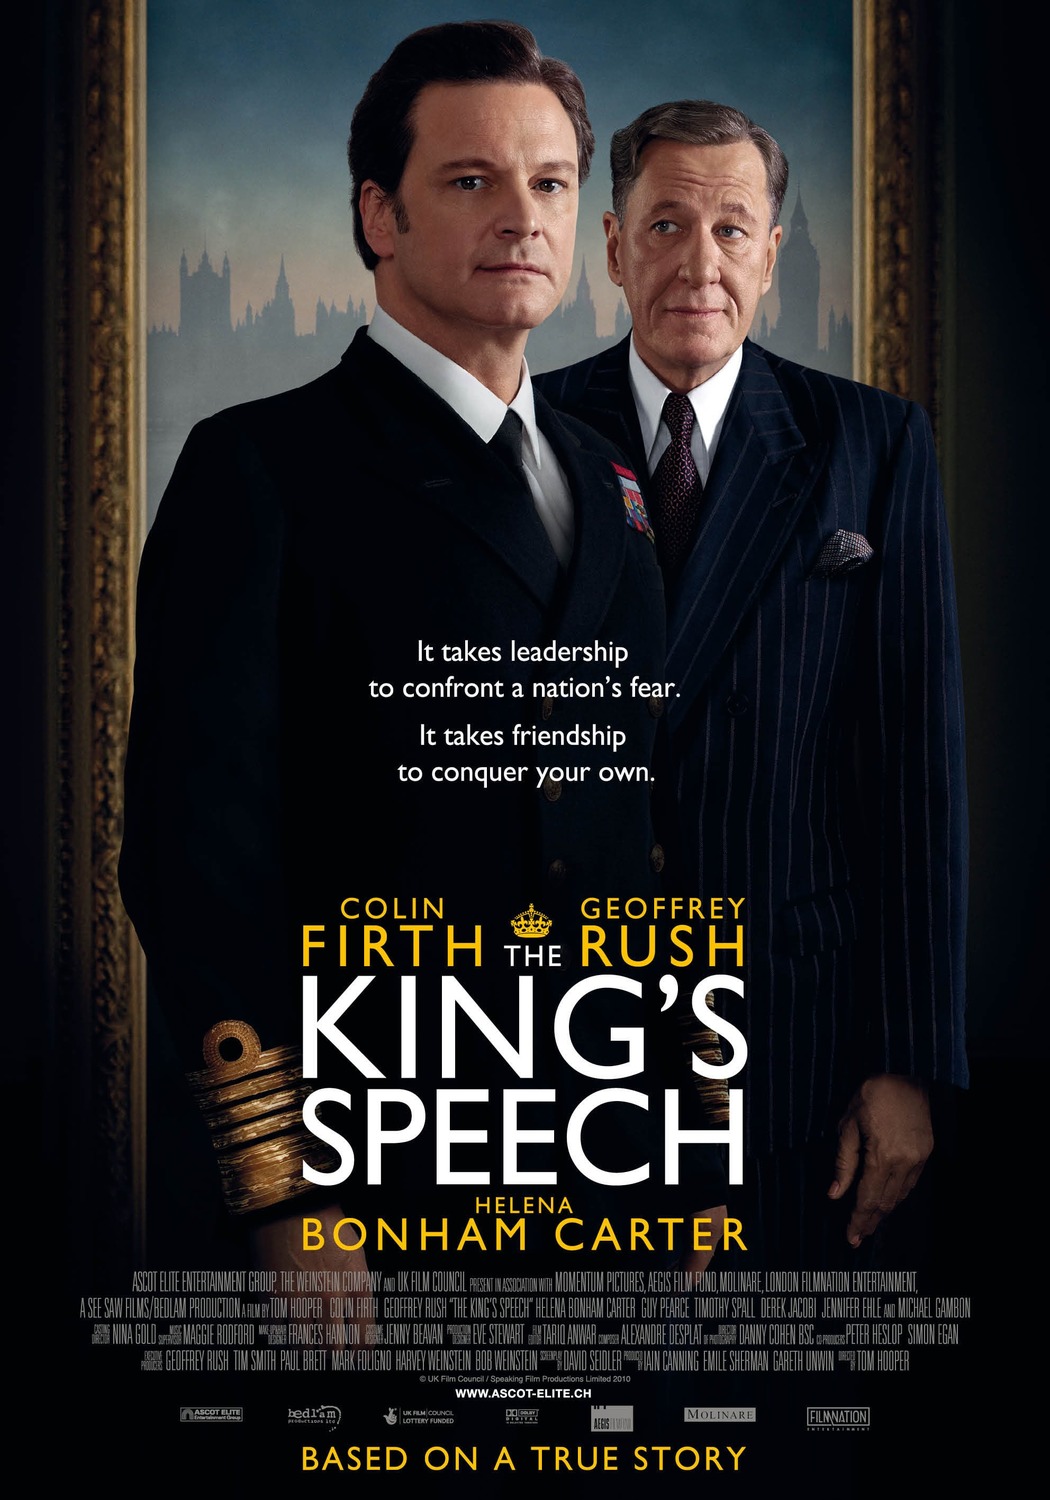 Extra Large Movie Poster Image for The King's Speech (#13 of 13)